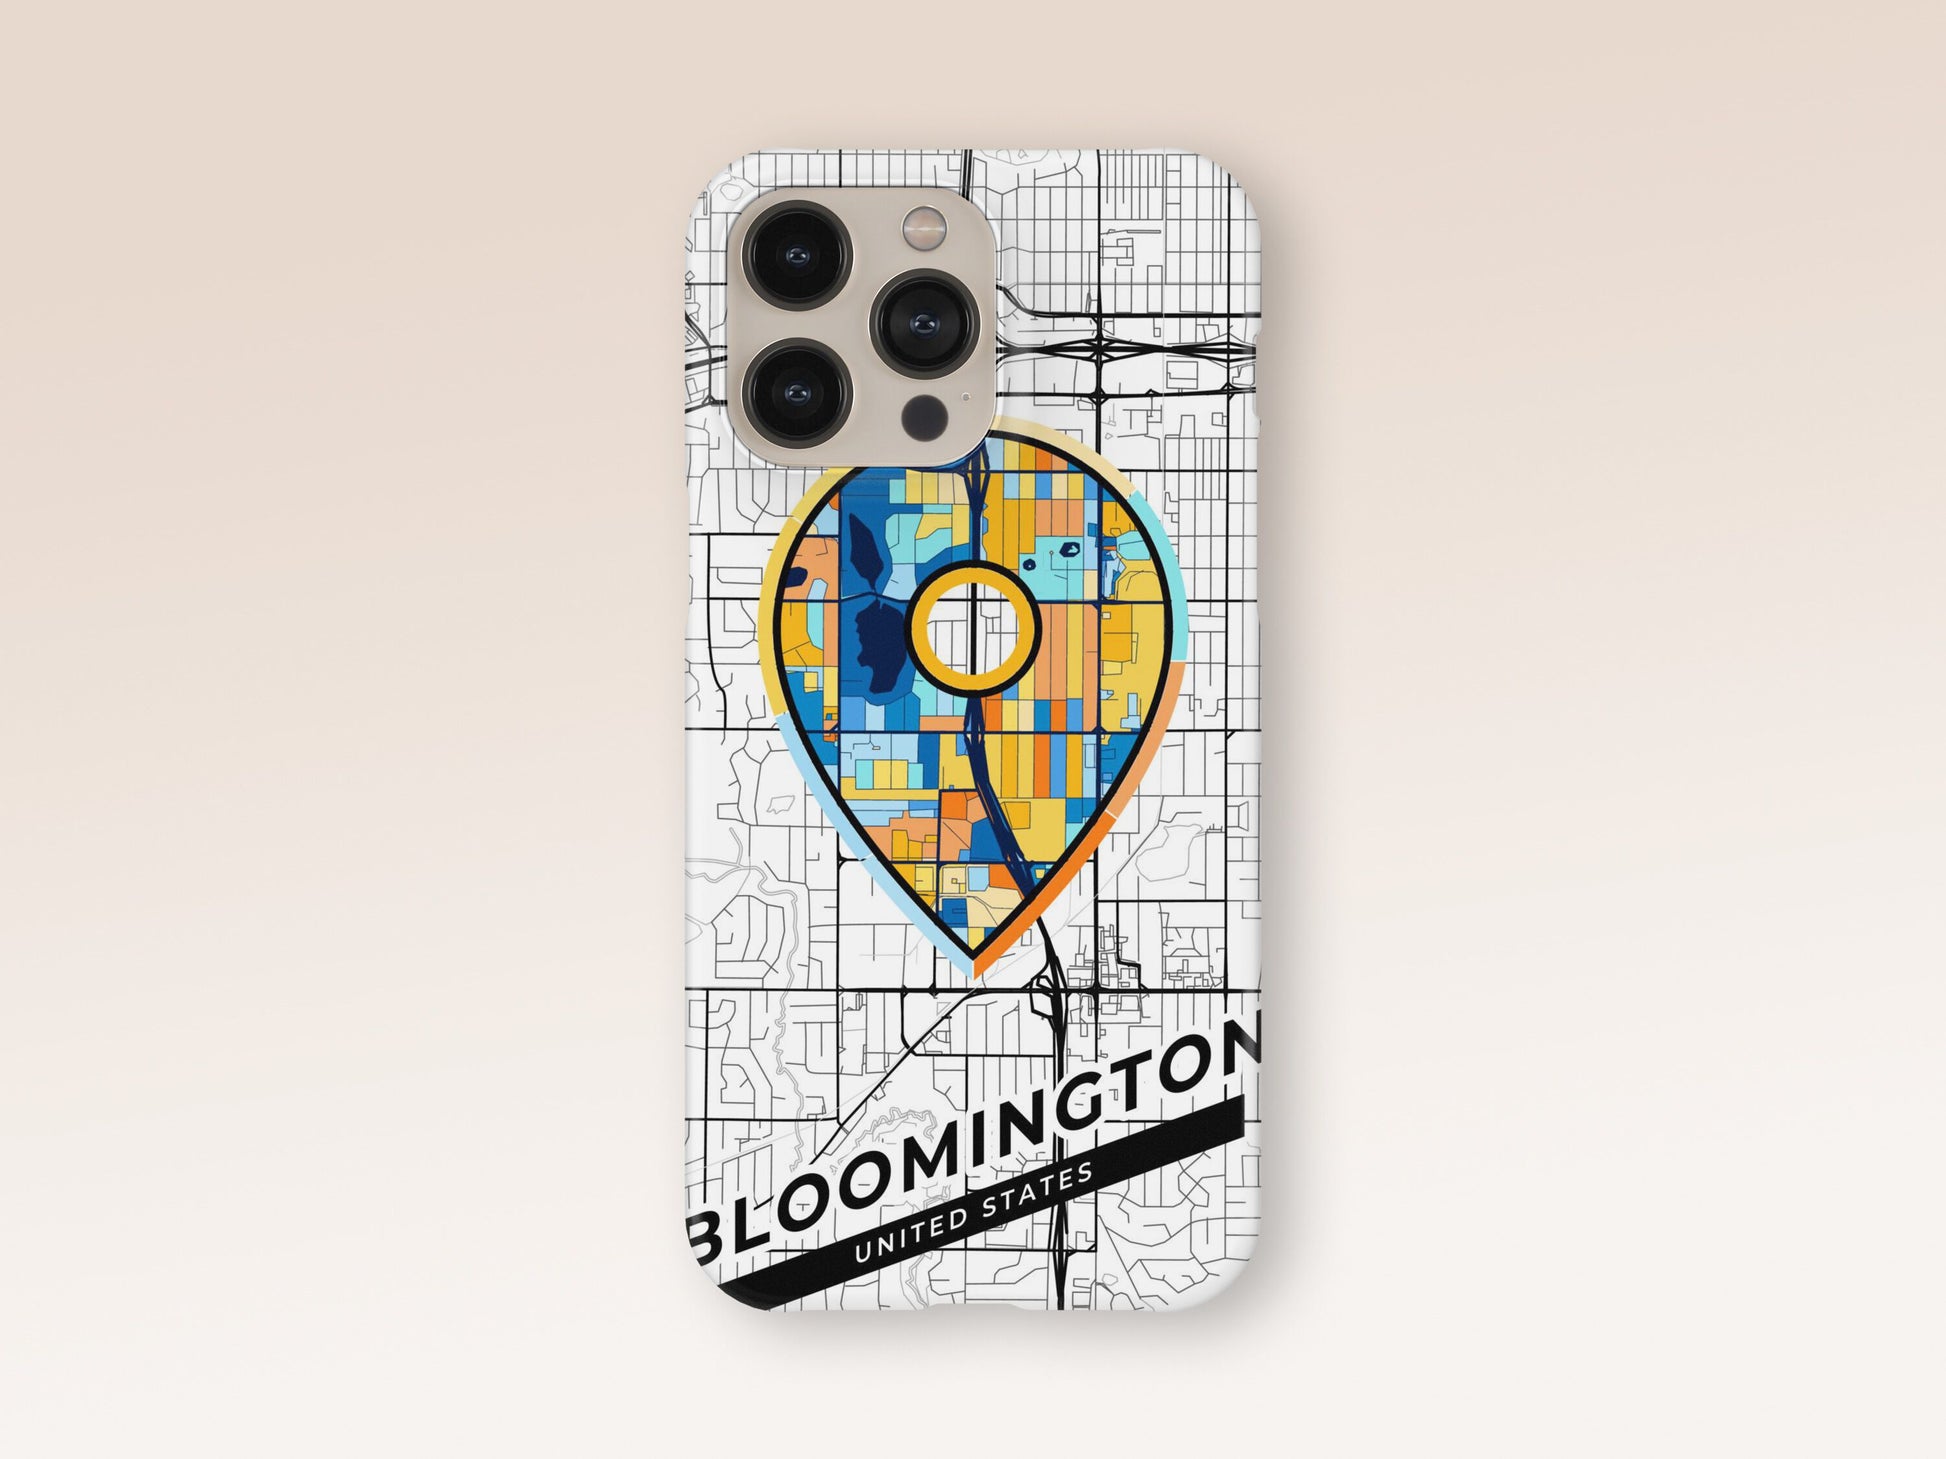 Bloomington Minnesota slim phone case with colorful icon. Birthday, wedding or housewarming gift. Couple match cases. 1